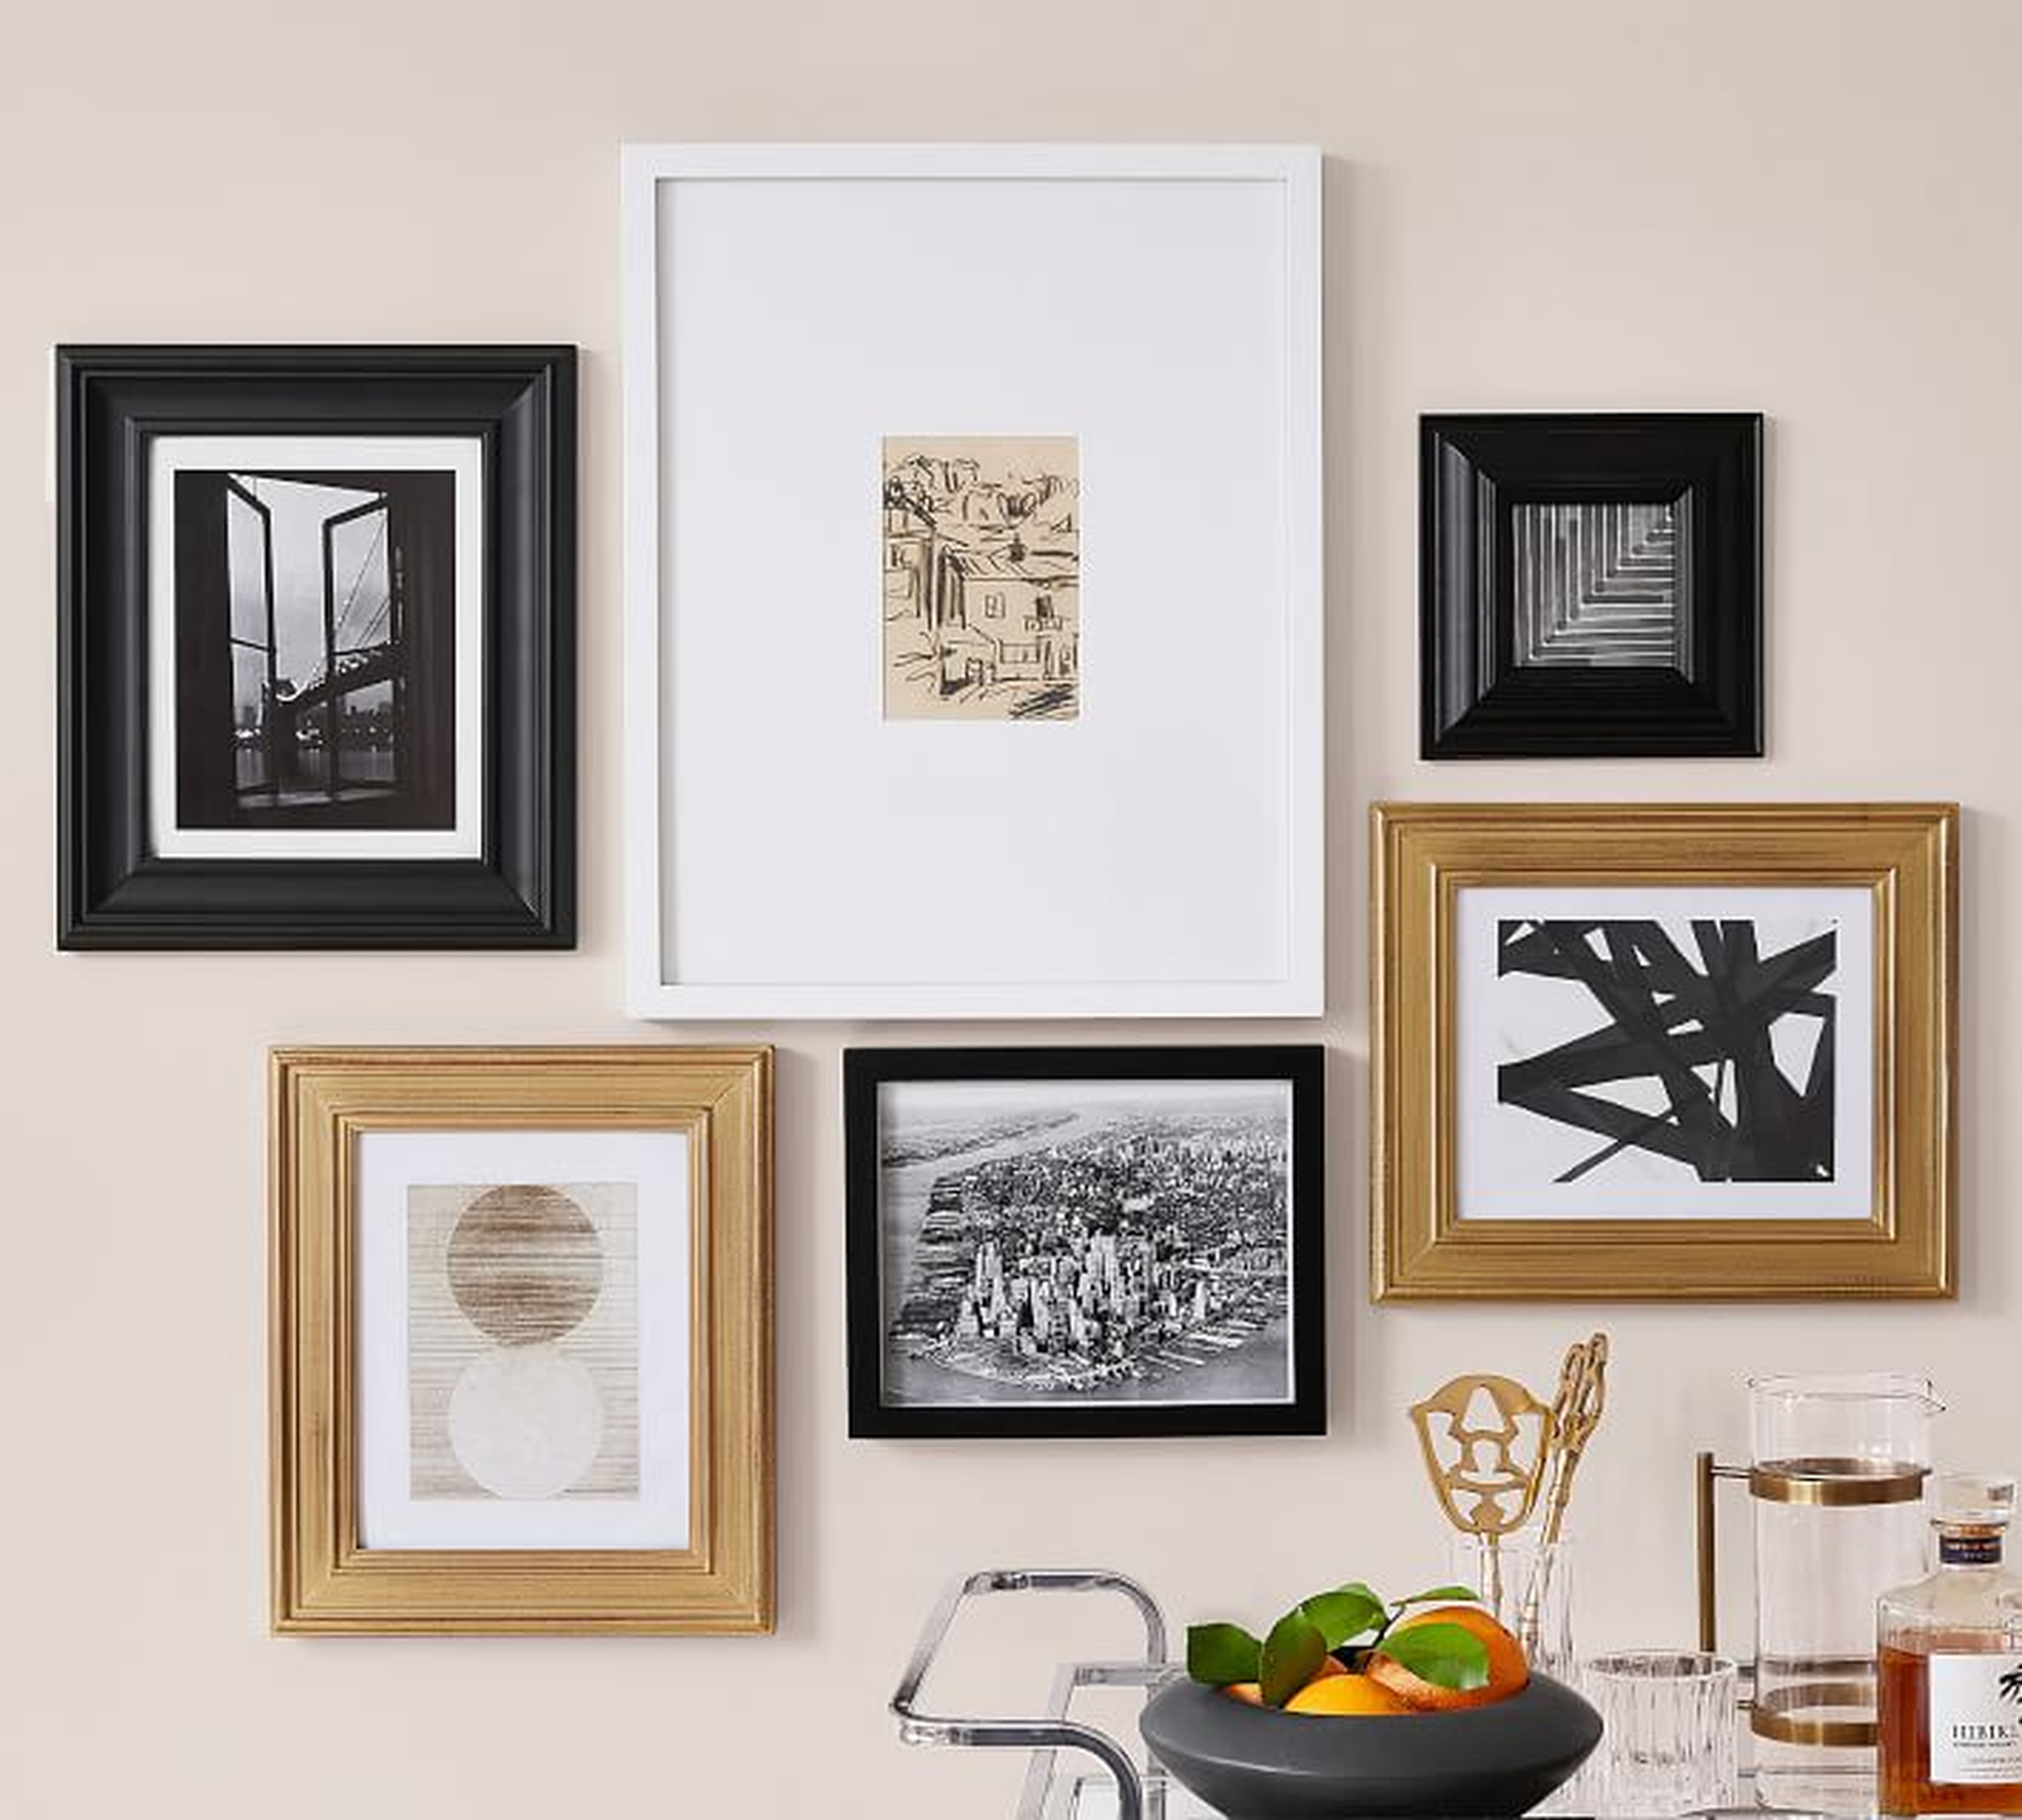 Gallery In A Box Frames - Gold, Black & White - Pottery Barn